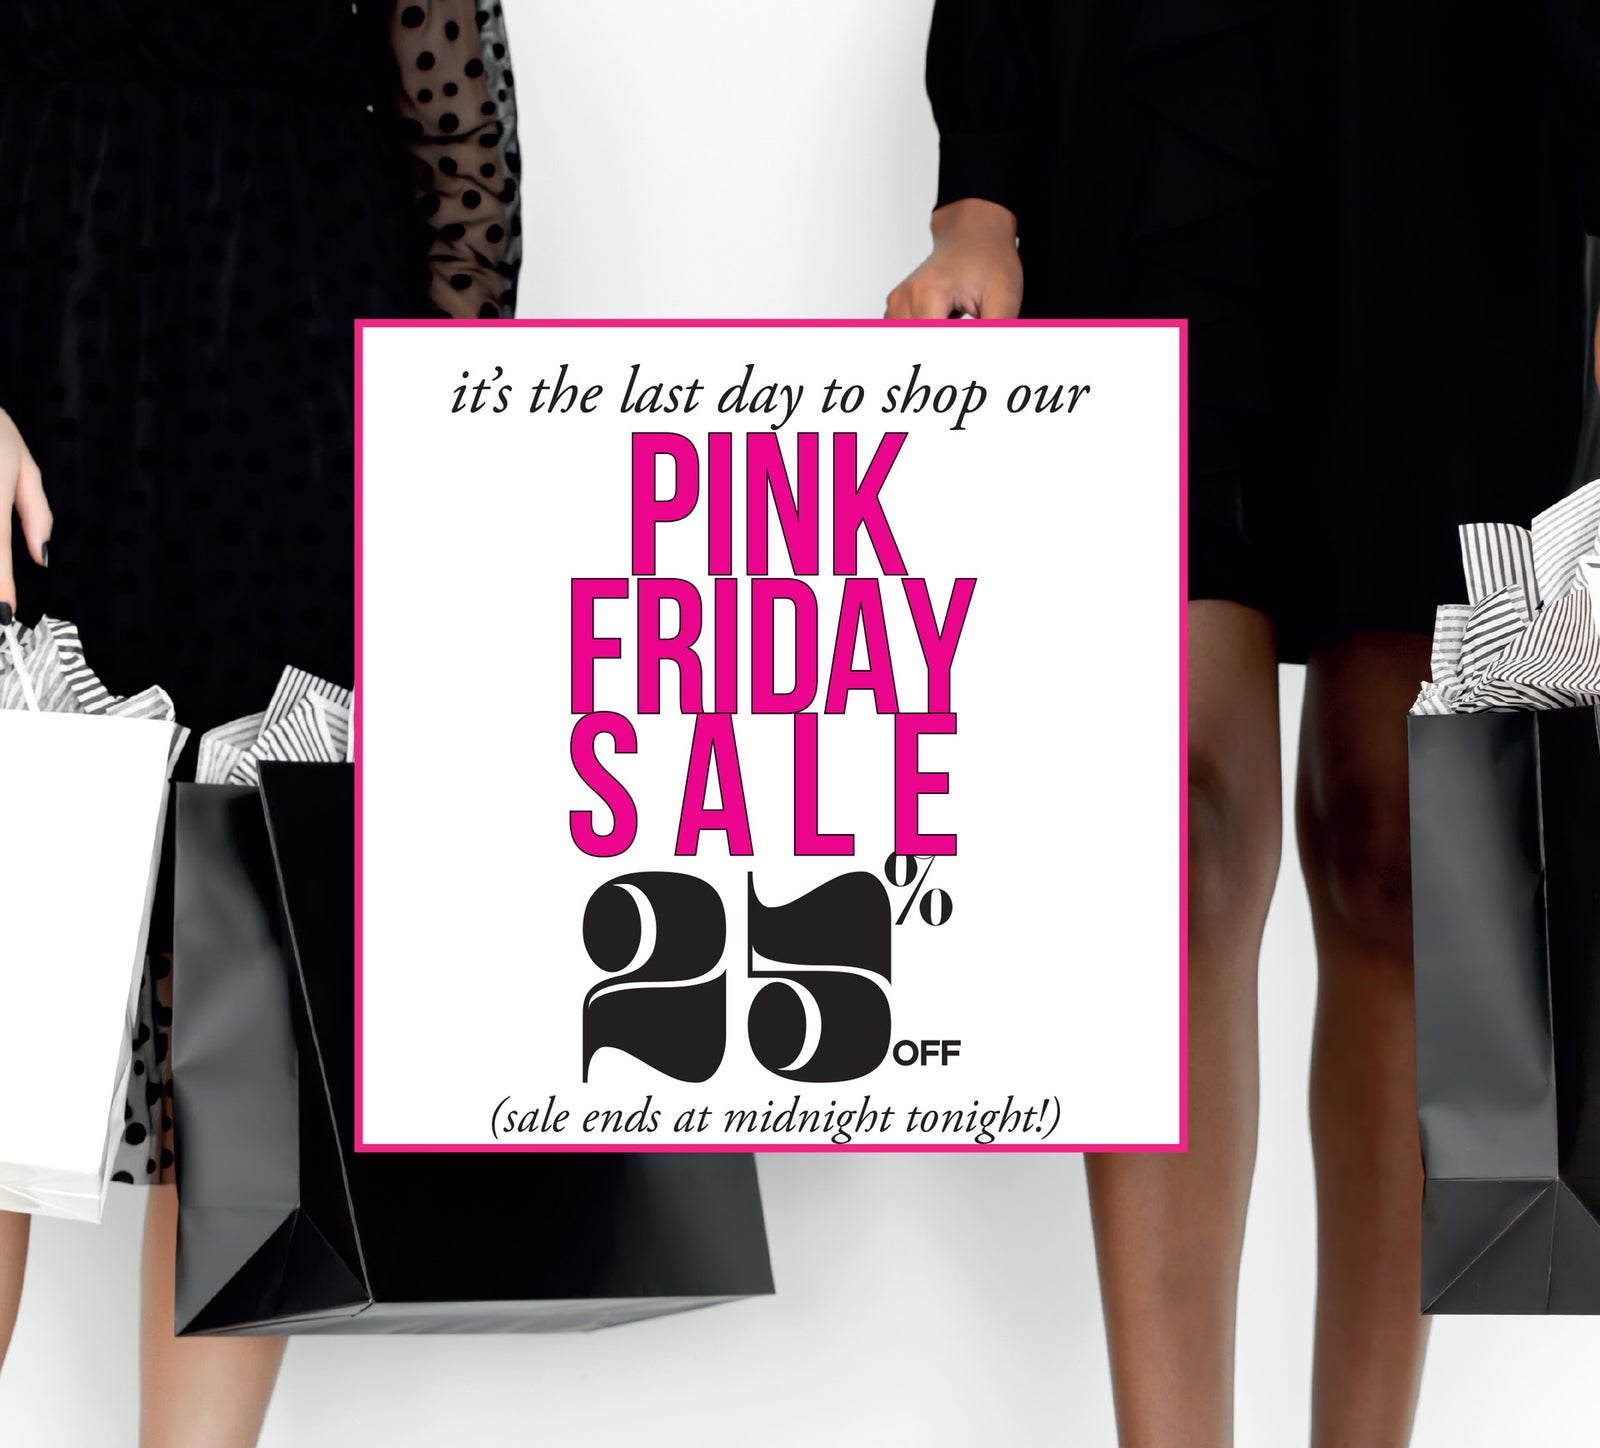 TODAY is the LAST DAY to SHOP Our PINK FRIDAY Sale! - Effie's Paper